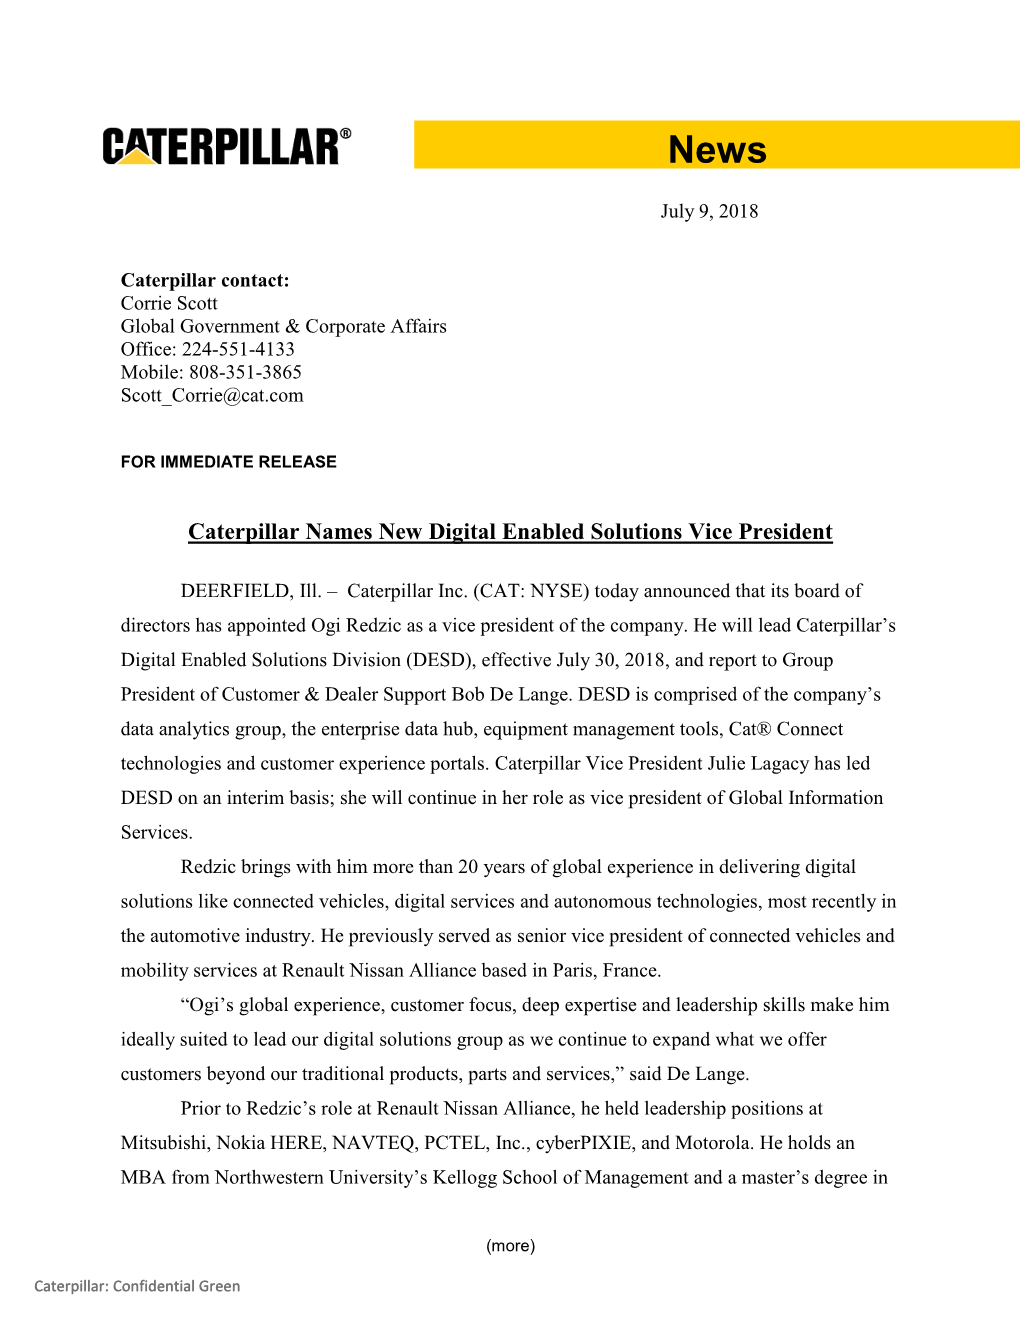 Caterpillar Names New Digital Enabled Solutions Vice President